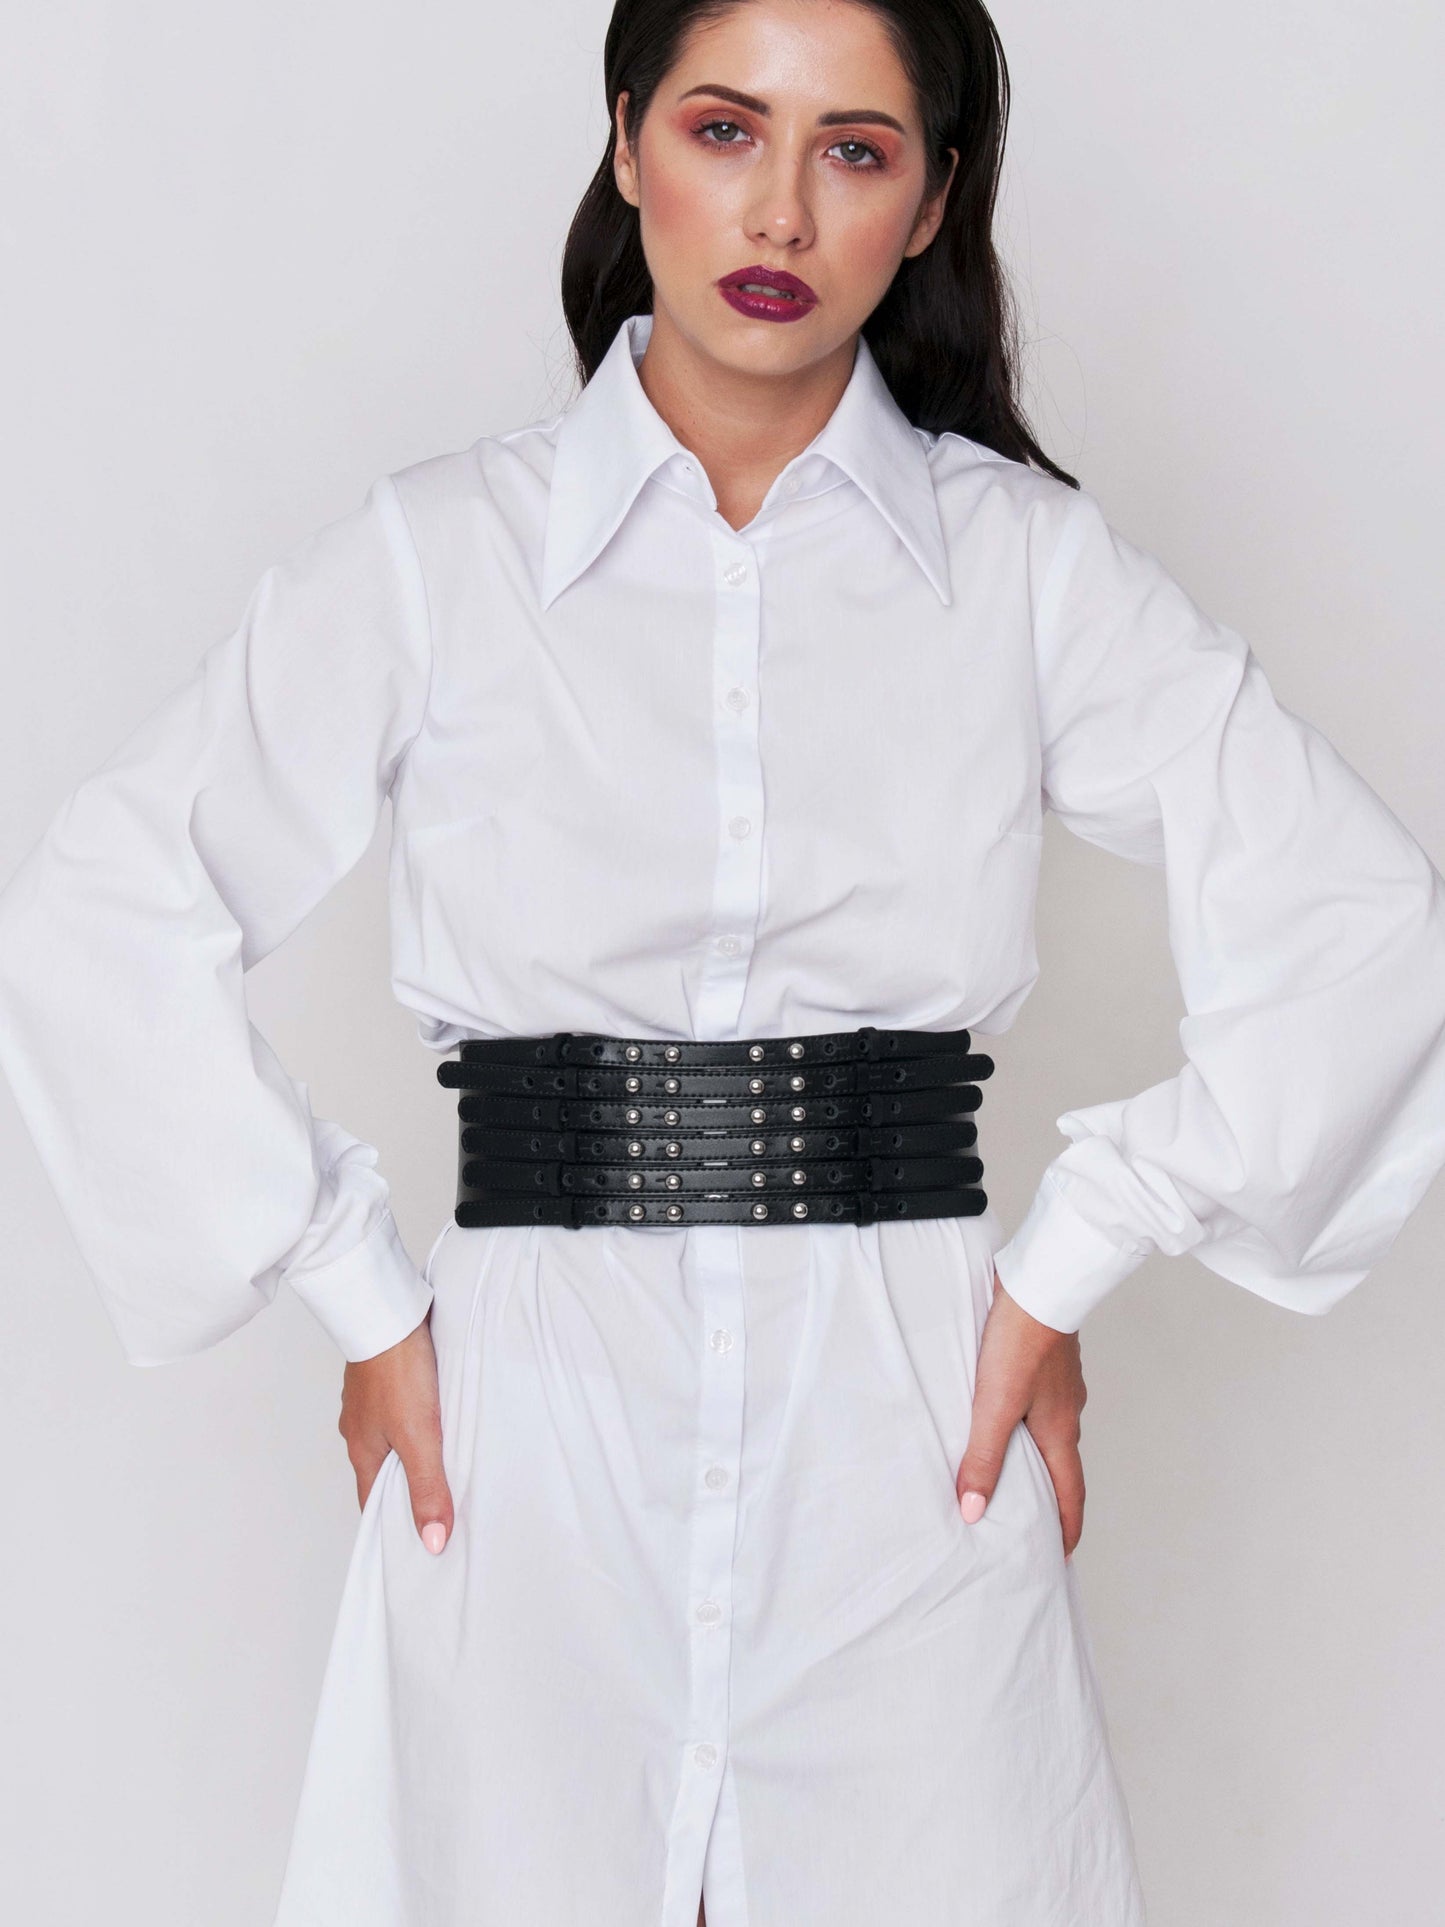 Front view of black wide belt worn by a woman over a white dress shirt.